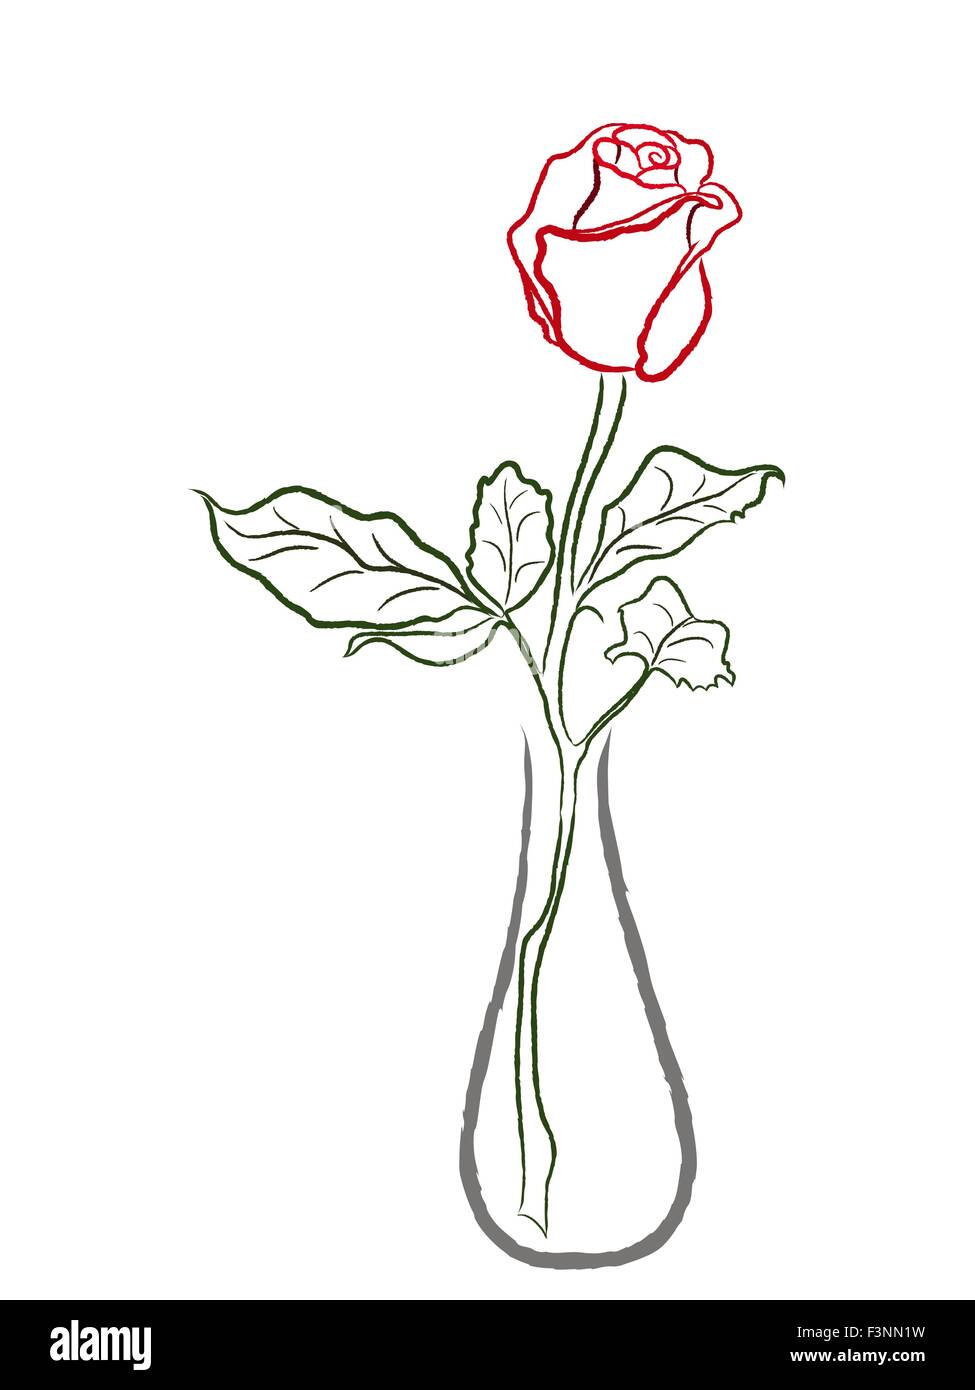 Stylized red rose in a vase isolated on white background, hand drawing vector illustration Stock Vector